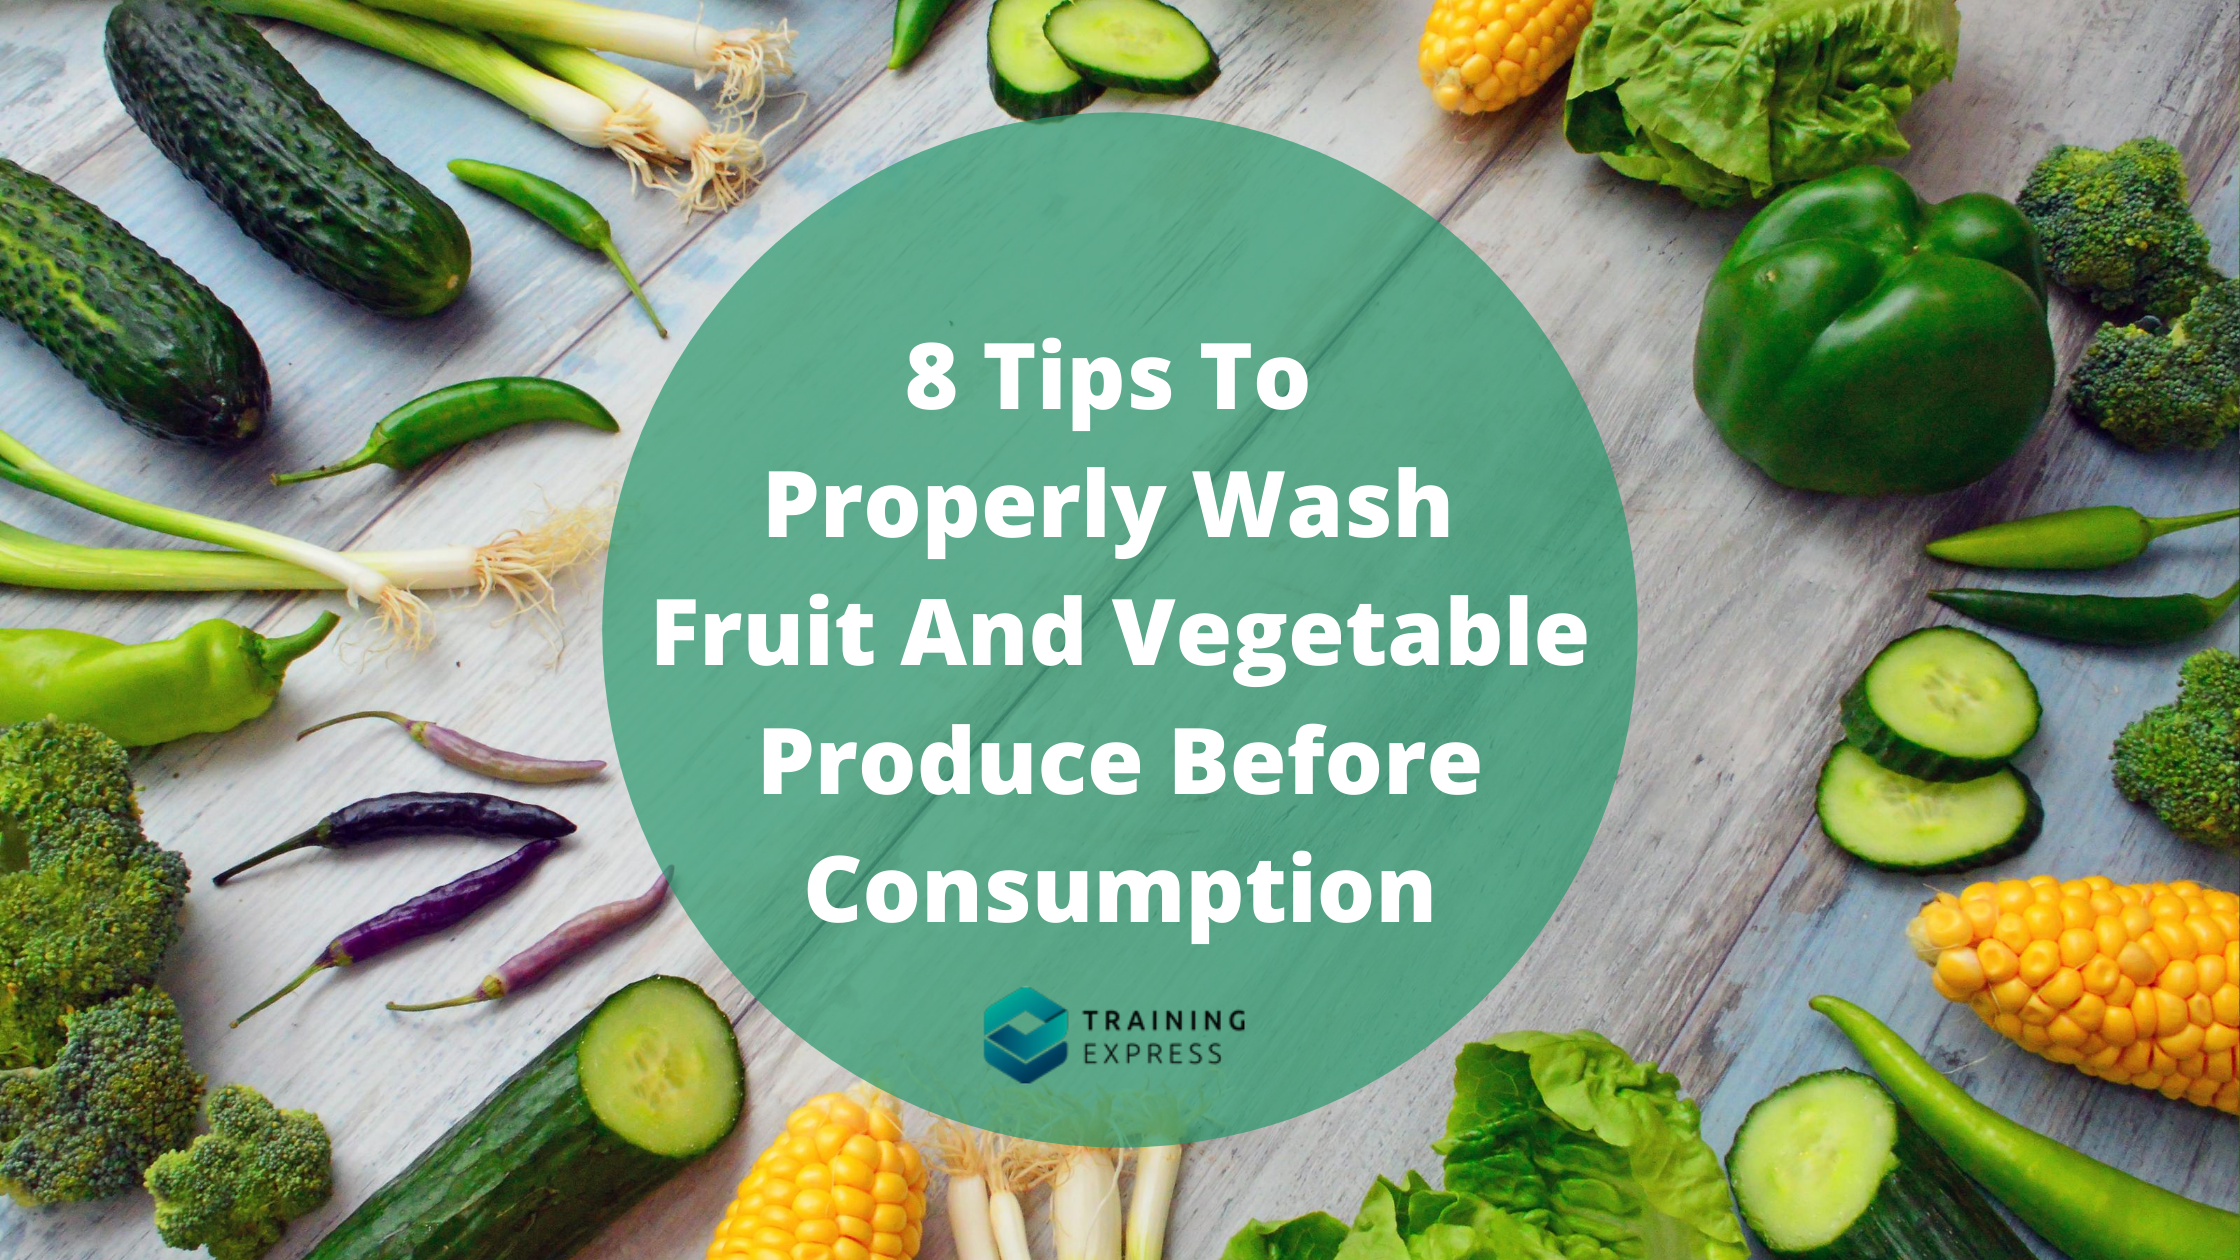 Tips To Properly Wash Fruit And Vegetable